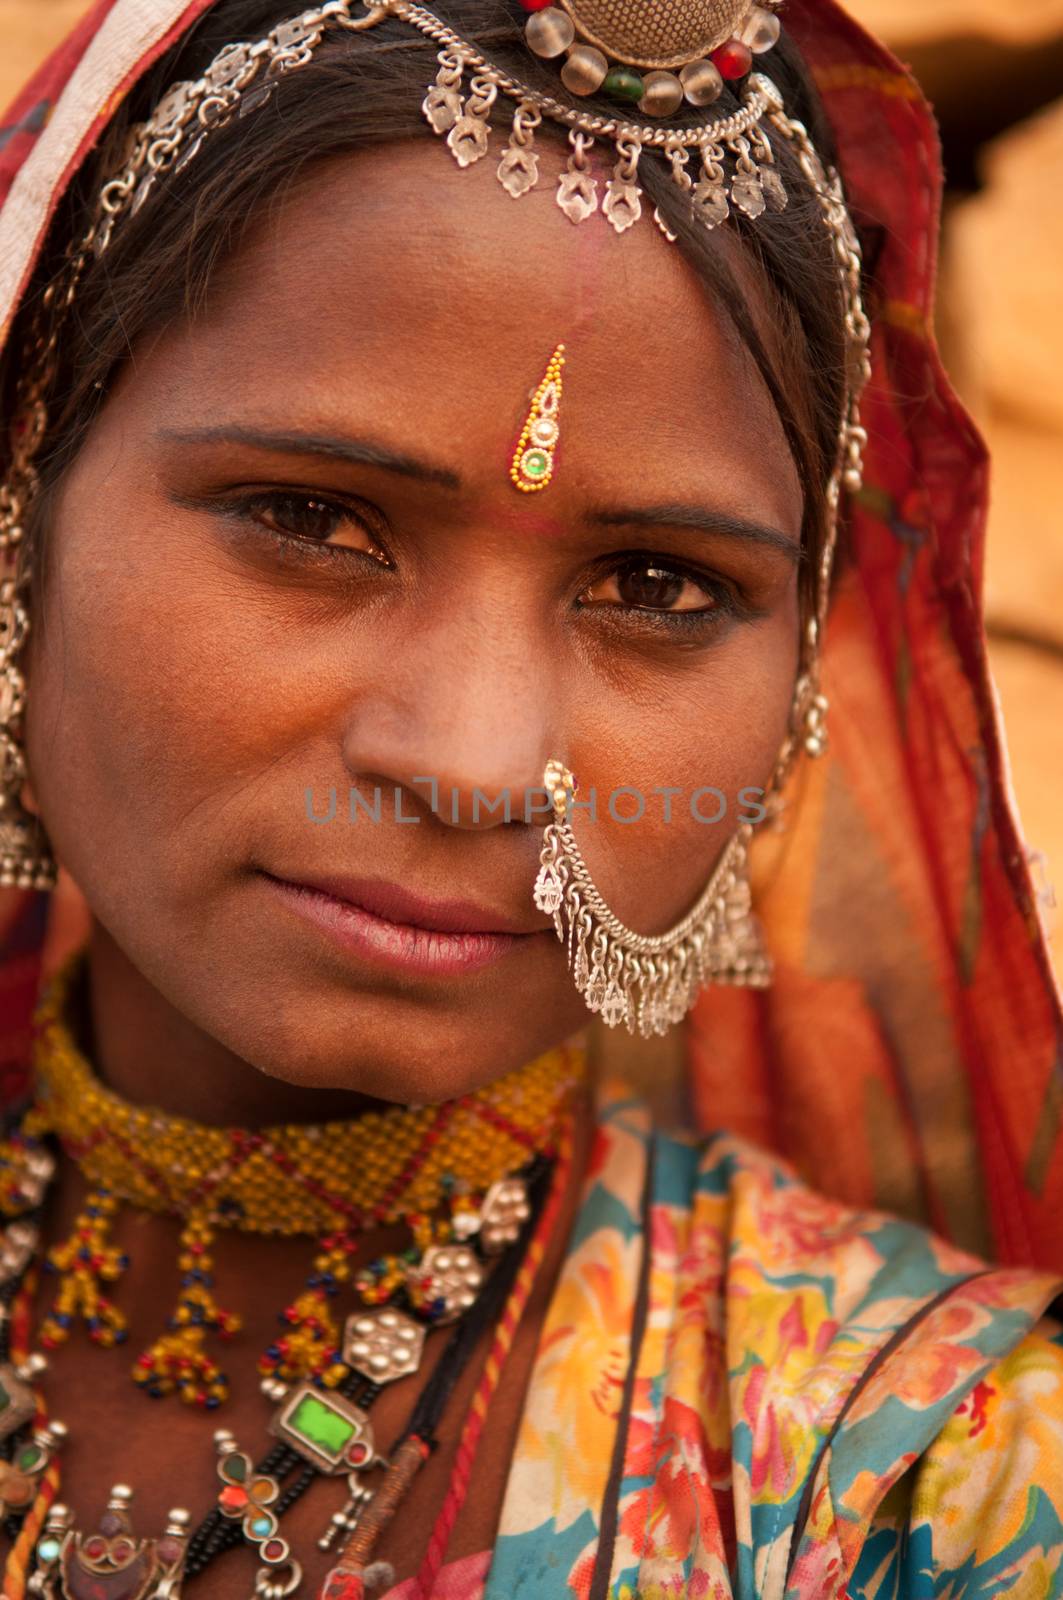 Close up portrait of traditional Indian woman in sari dress, India people.